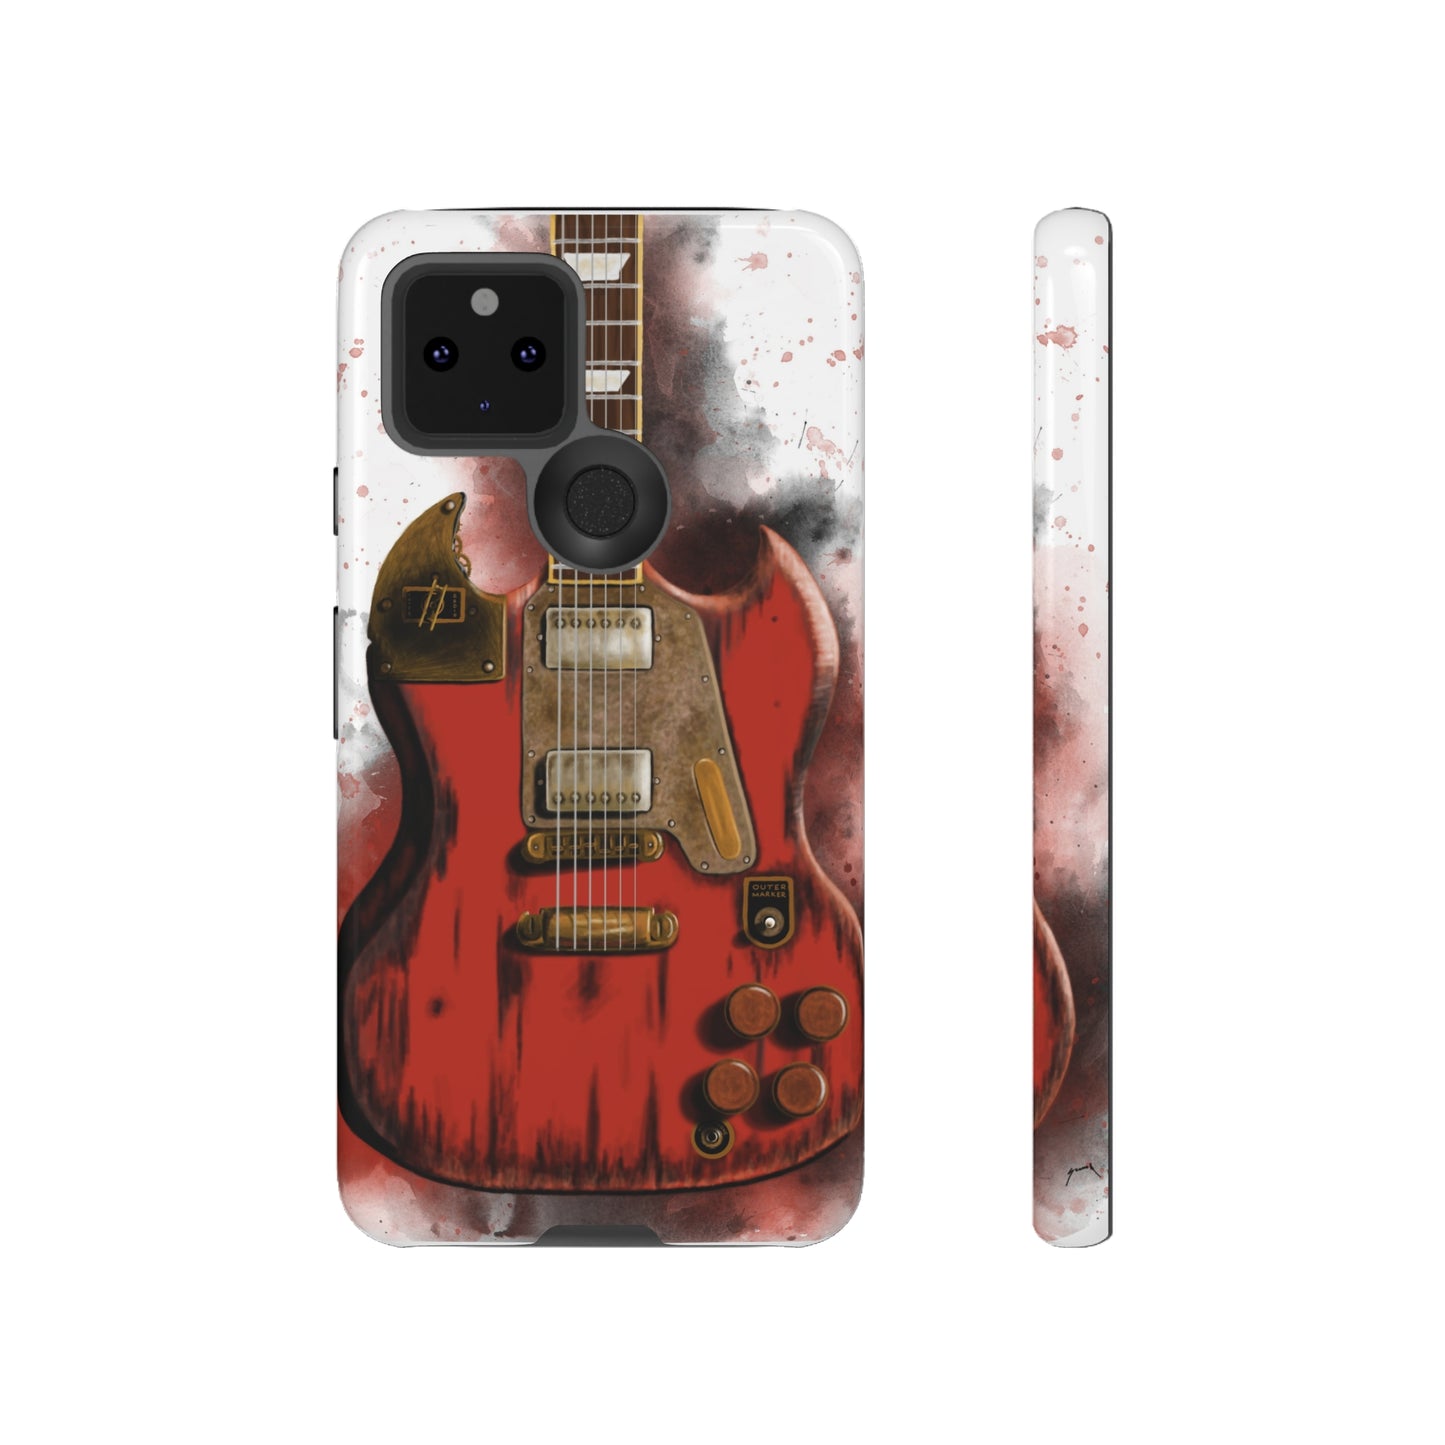 Steampunk Electric Guitar Art On Tough Phone Cases